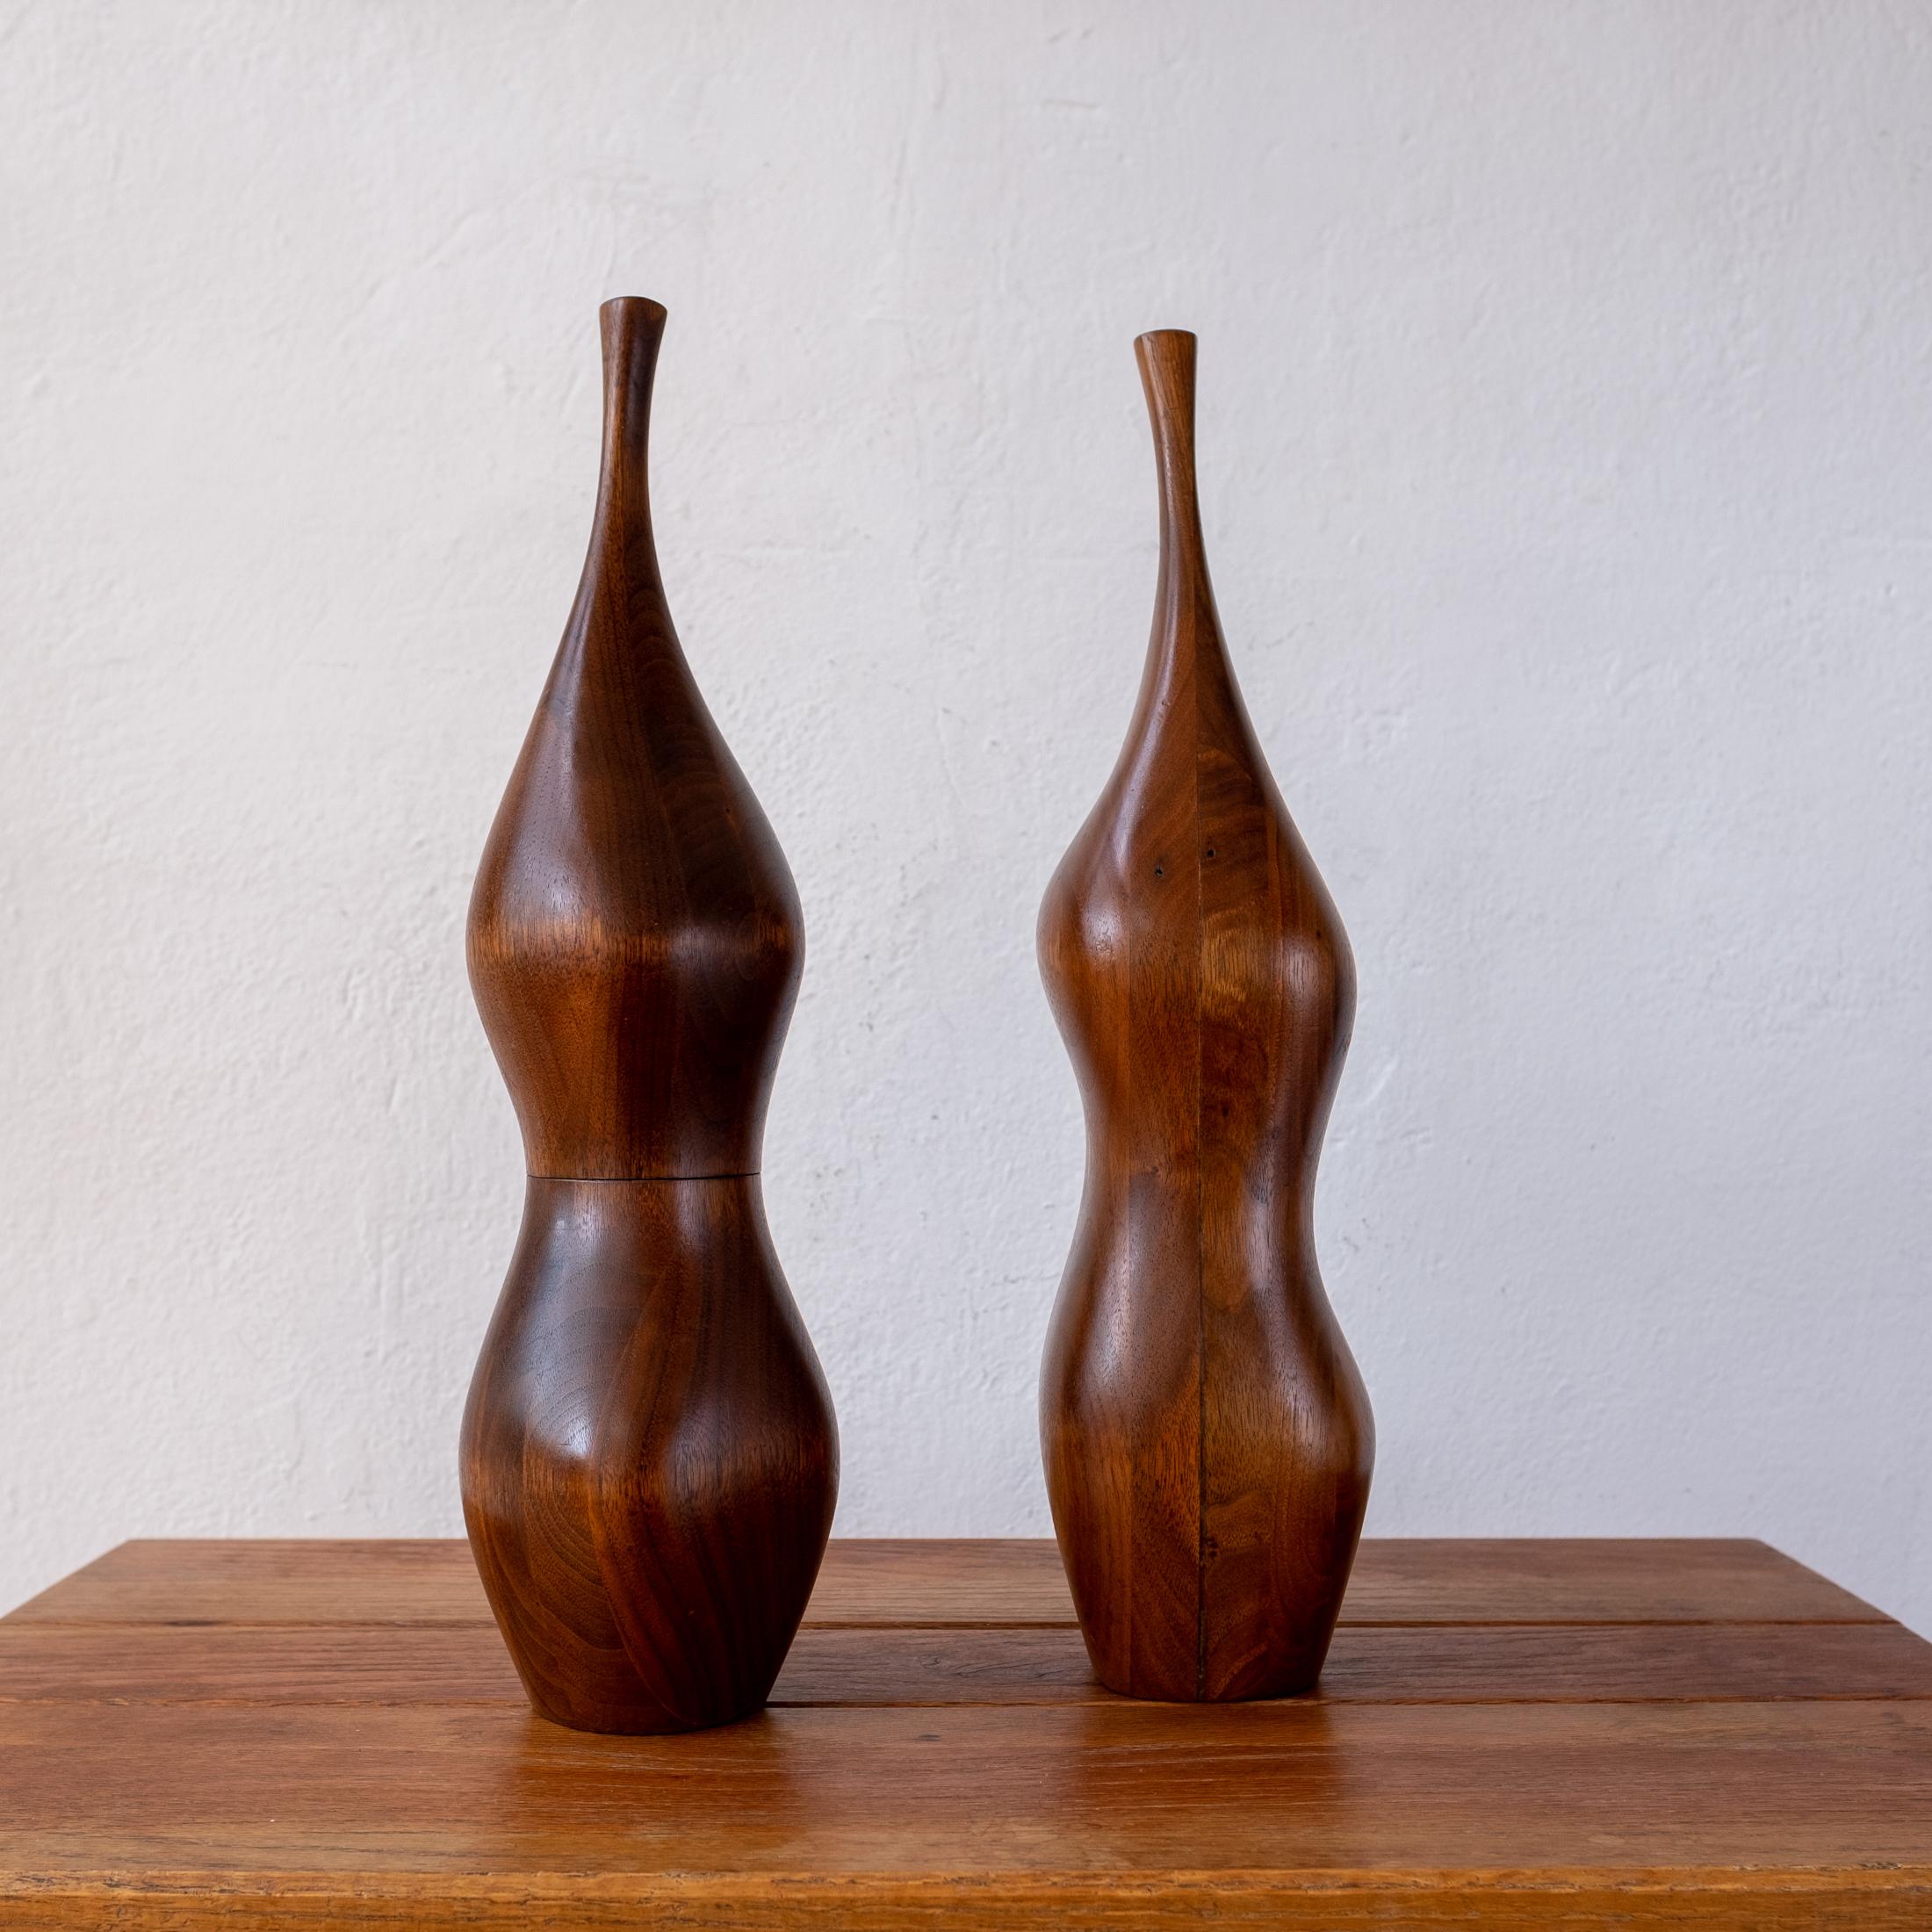 Monumental sculptural walnut salt shaker and pepper mill by Daniel Loomis Valenza. Crafted with heavily figured solid walnut, USA, 1970s

Daniel Loomis Valenza (b. 1934) is a New Hampshire craftsman and professor. He taught woodworking at the